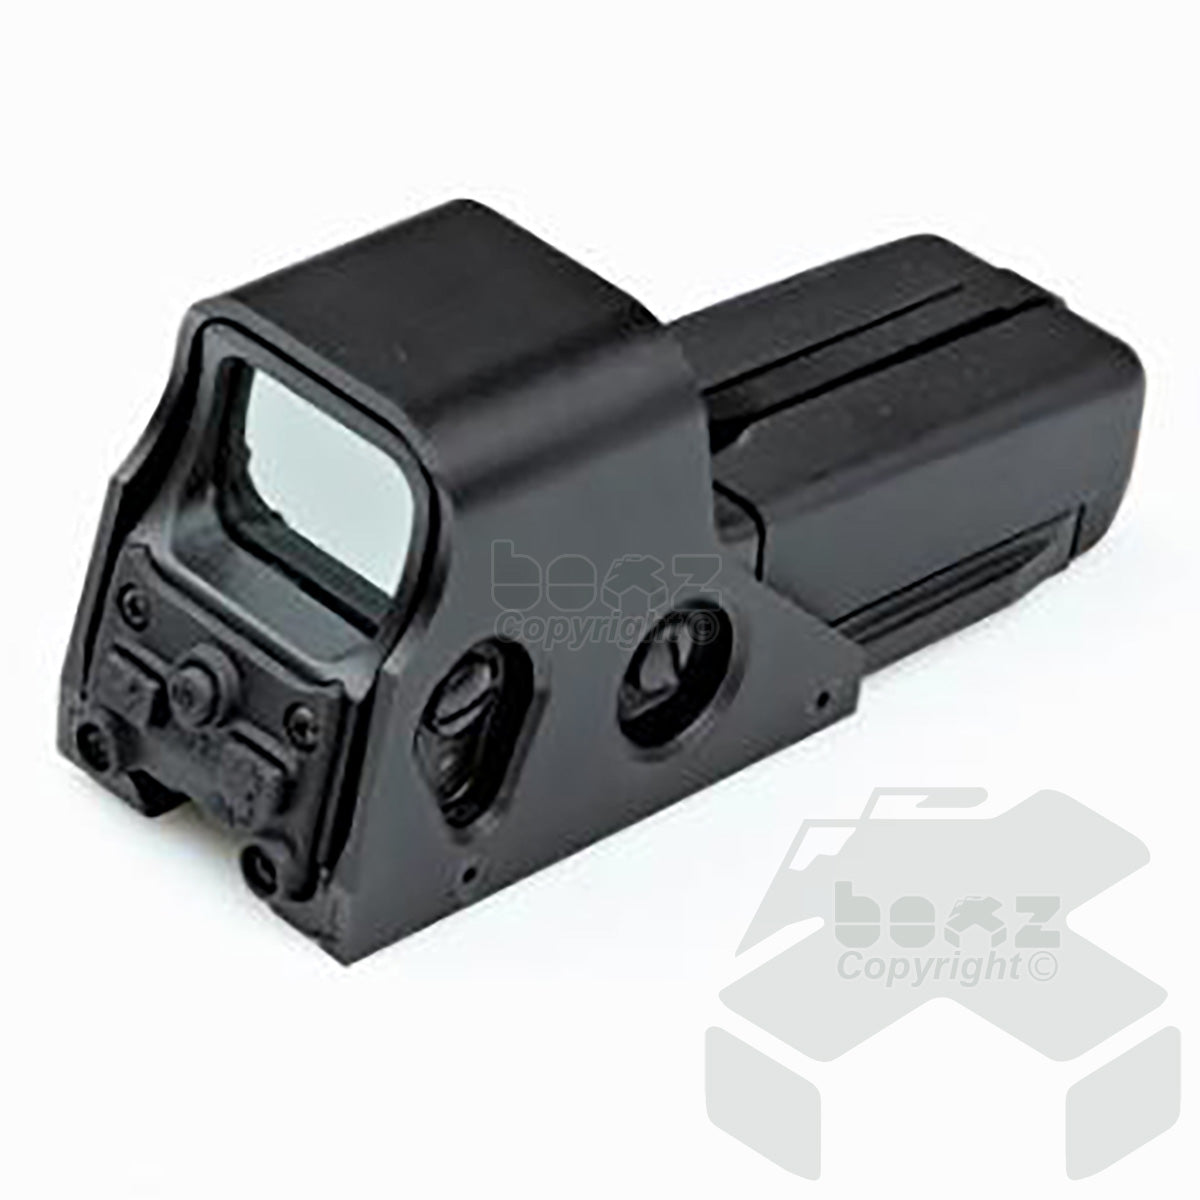 Strike Systems Advanced 552 Red/Green Holographic sight - Black